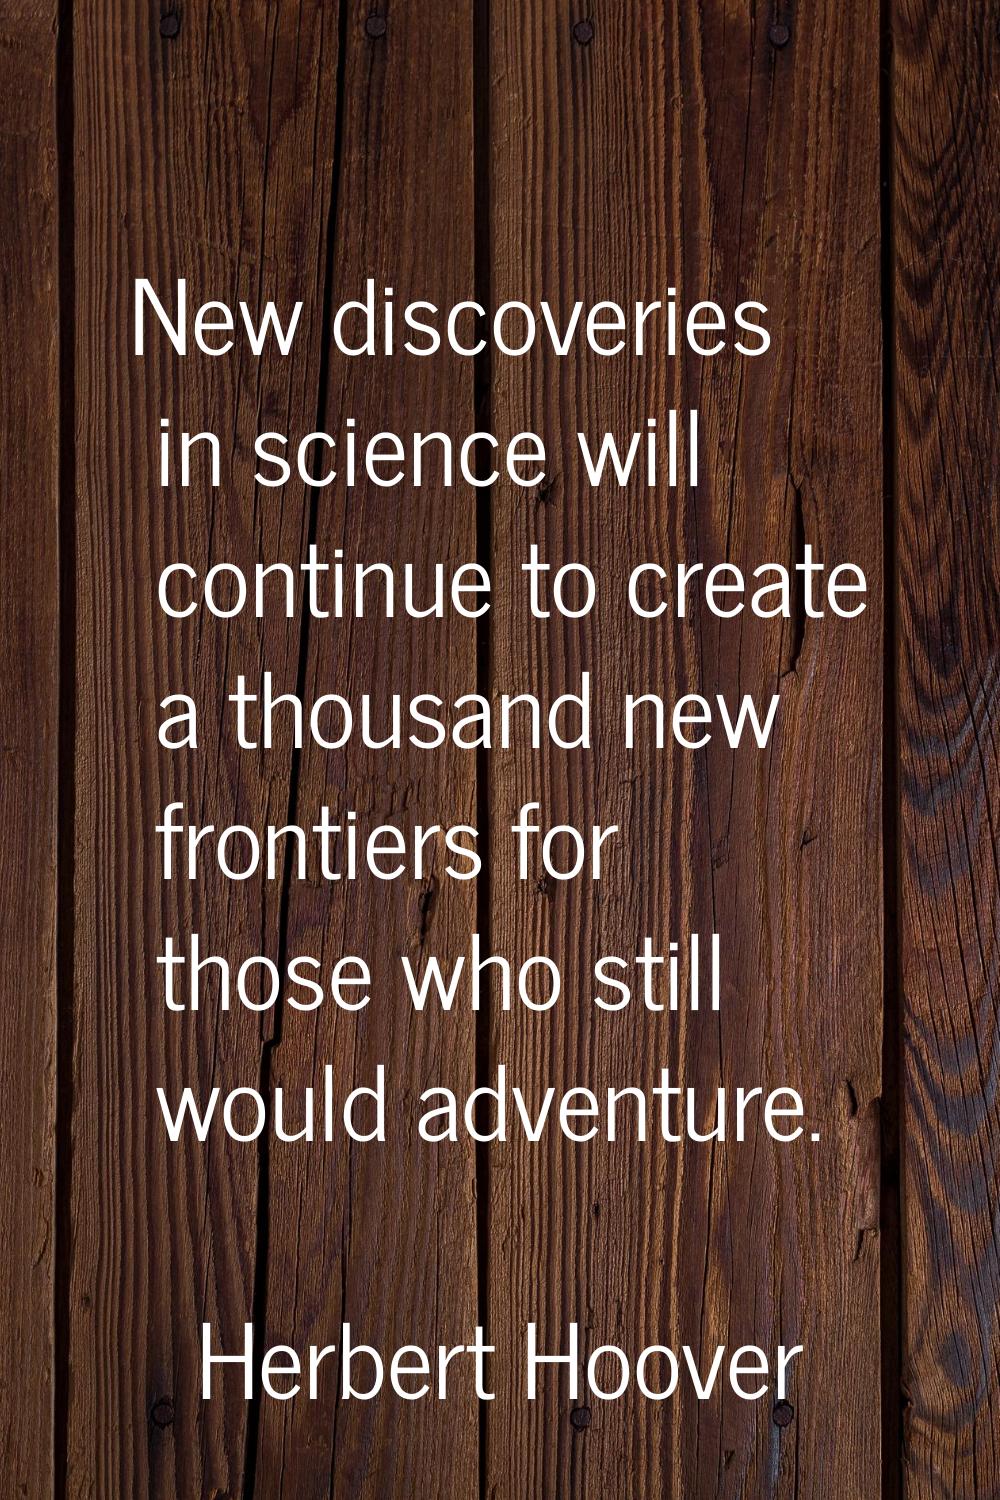 New discoveries in science will continue to create a thousand new frontiers for those who still wou